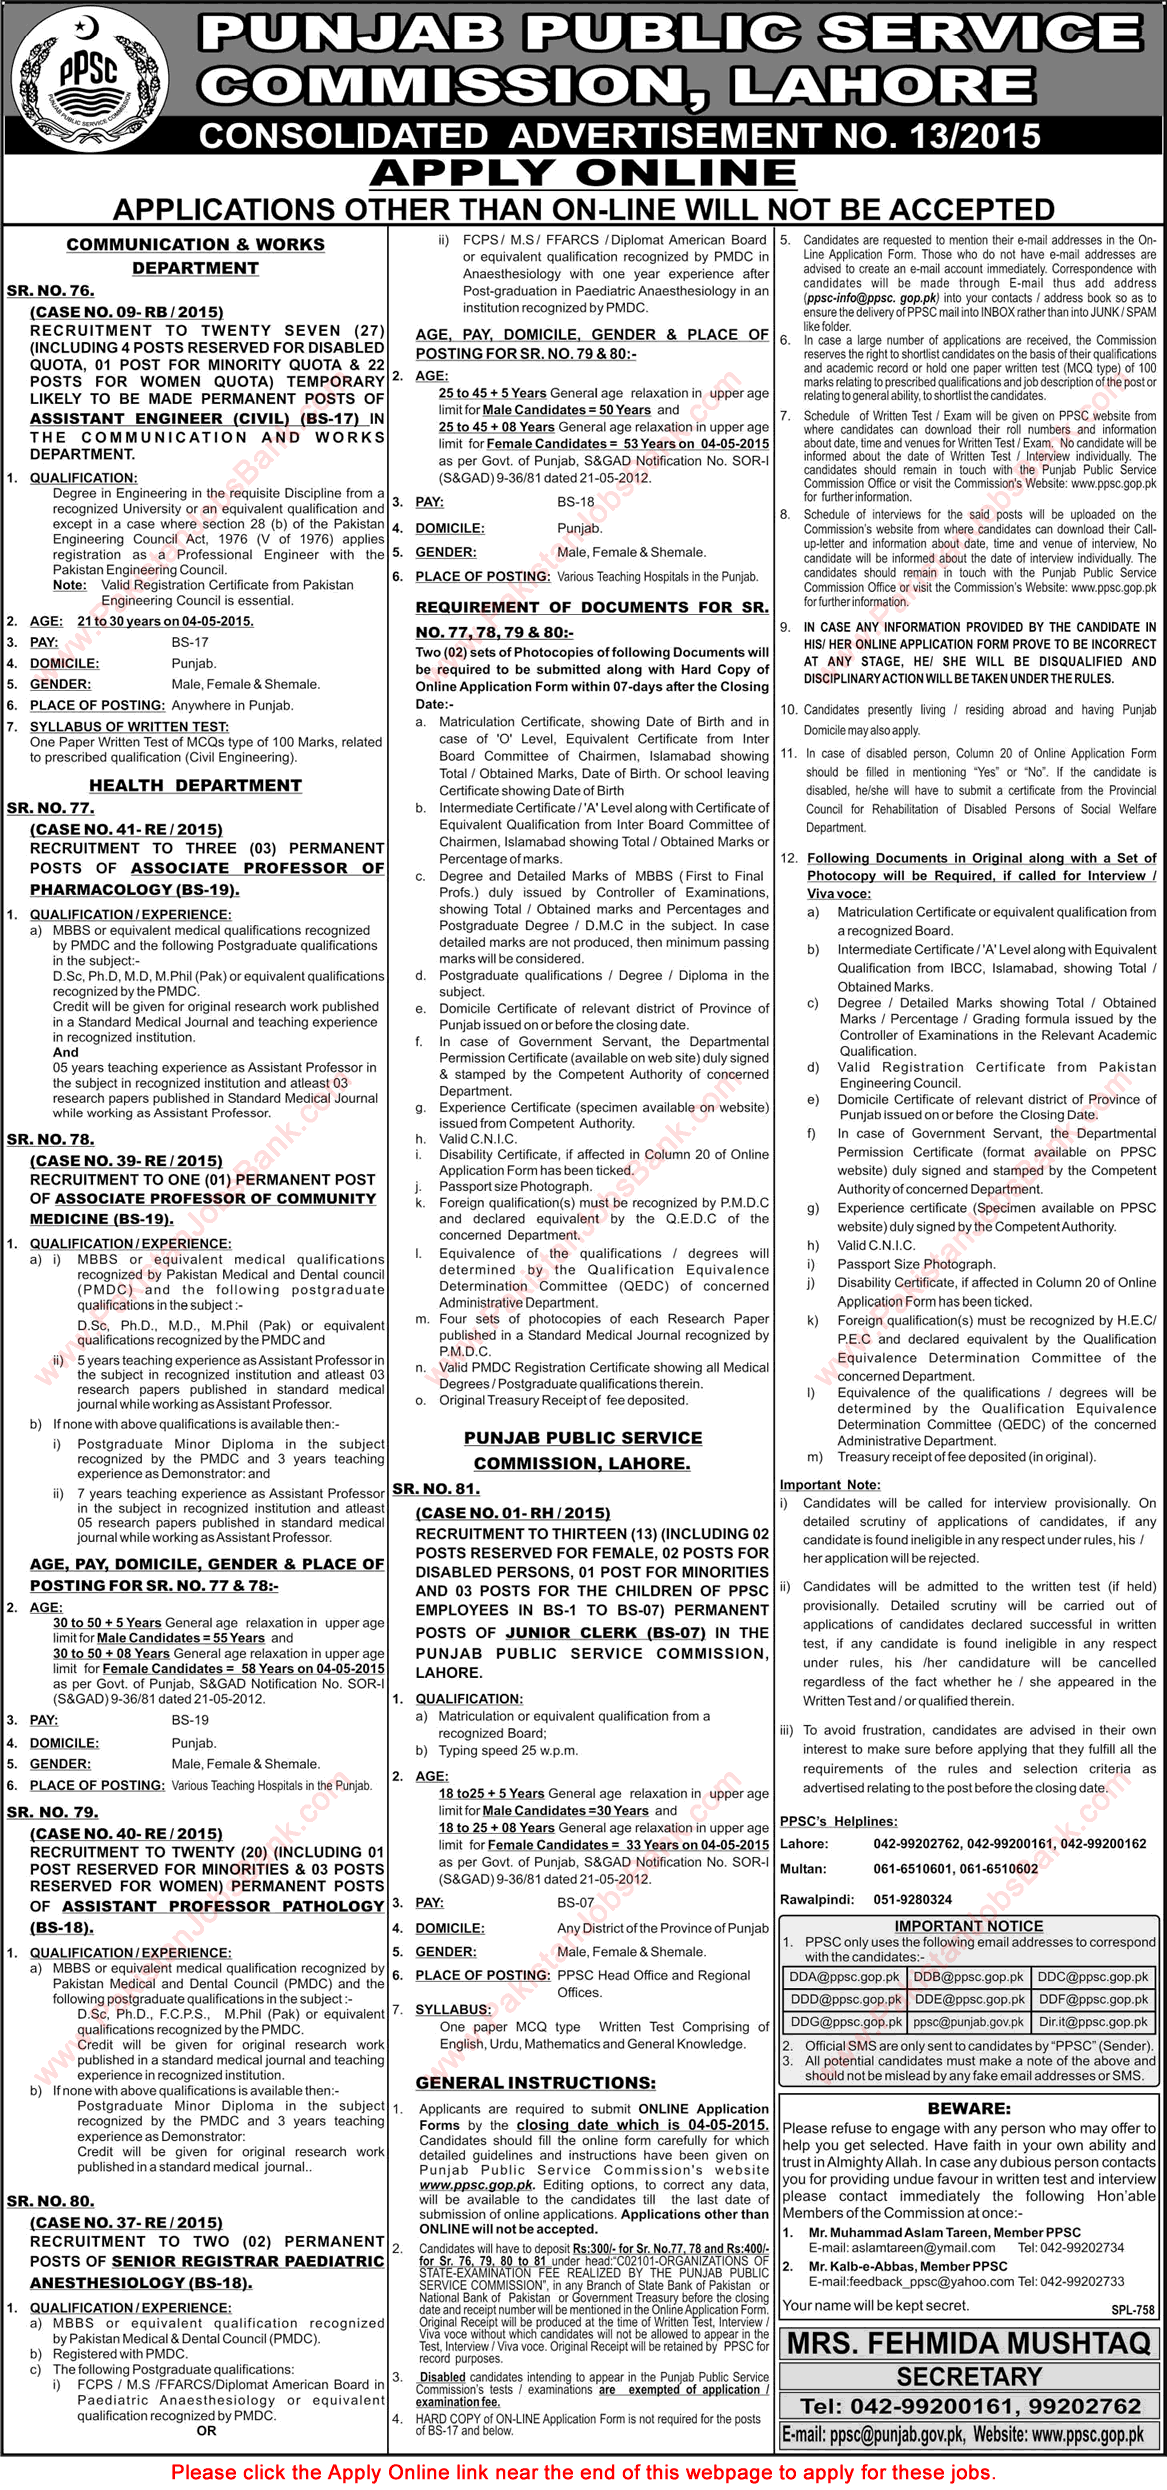 PPSC Jobs April 2015 Consolidated Advertisement No 13/2015 Latest